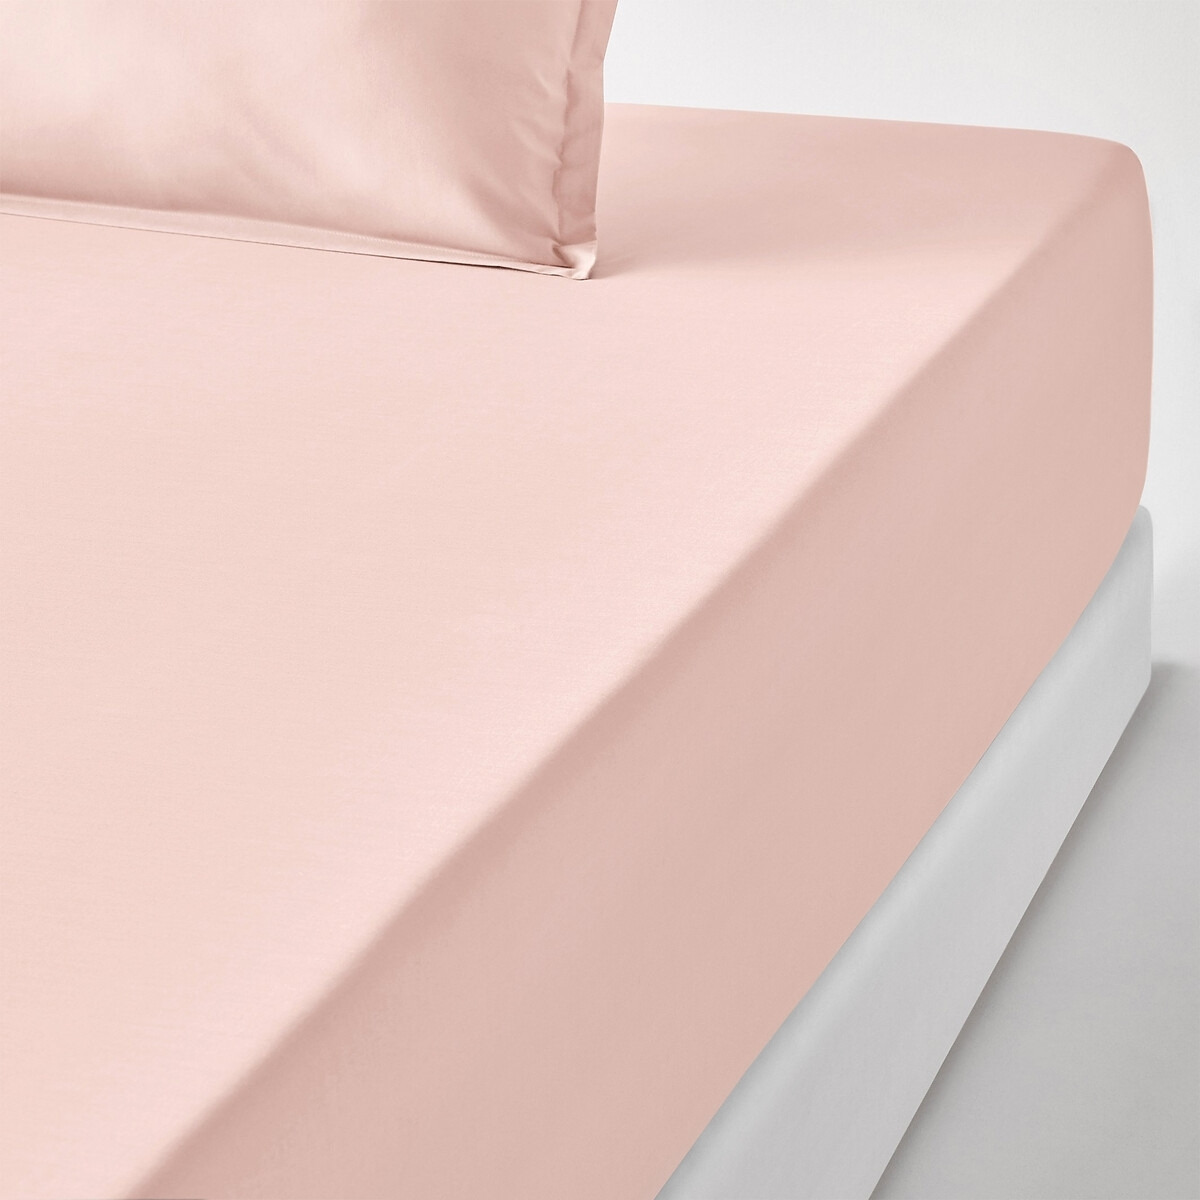 35cm 100% Cotton Percale 200 Thread Count Fitted Sheet - image 1